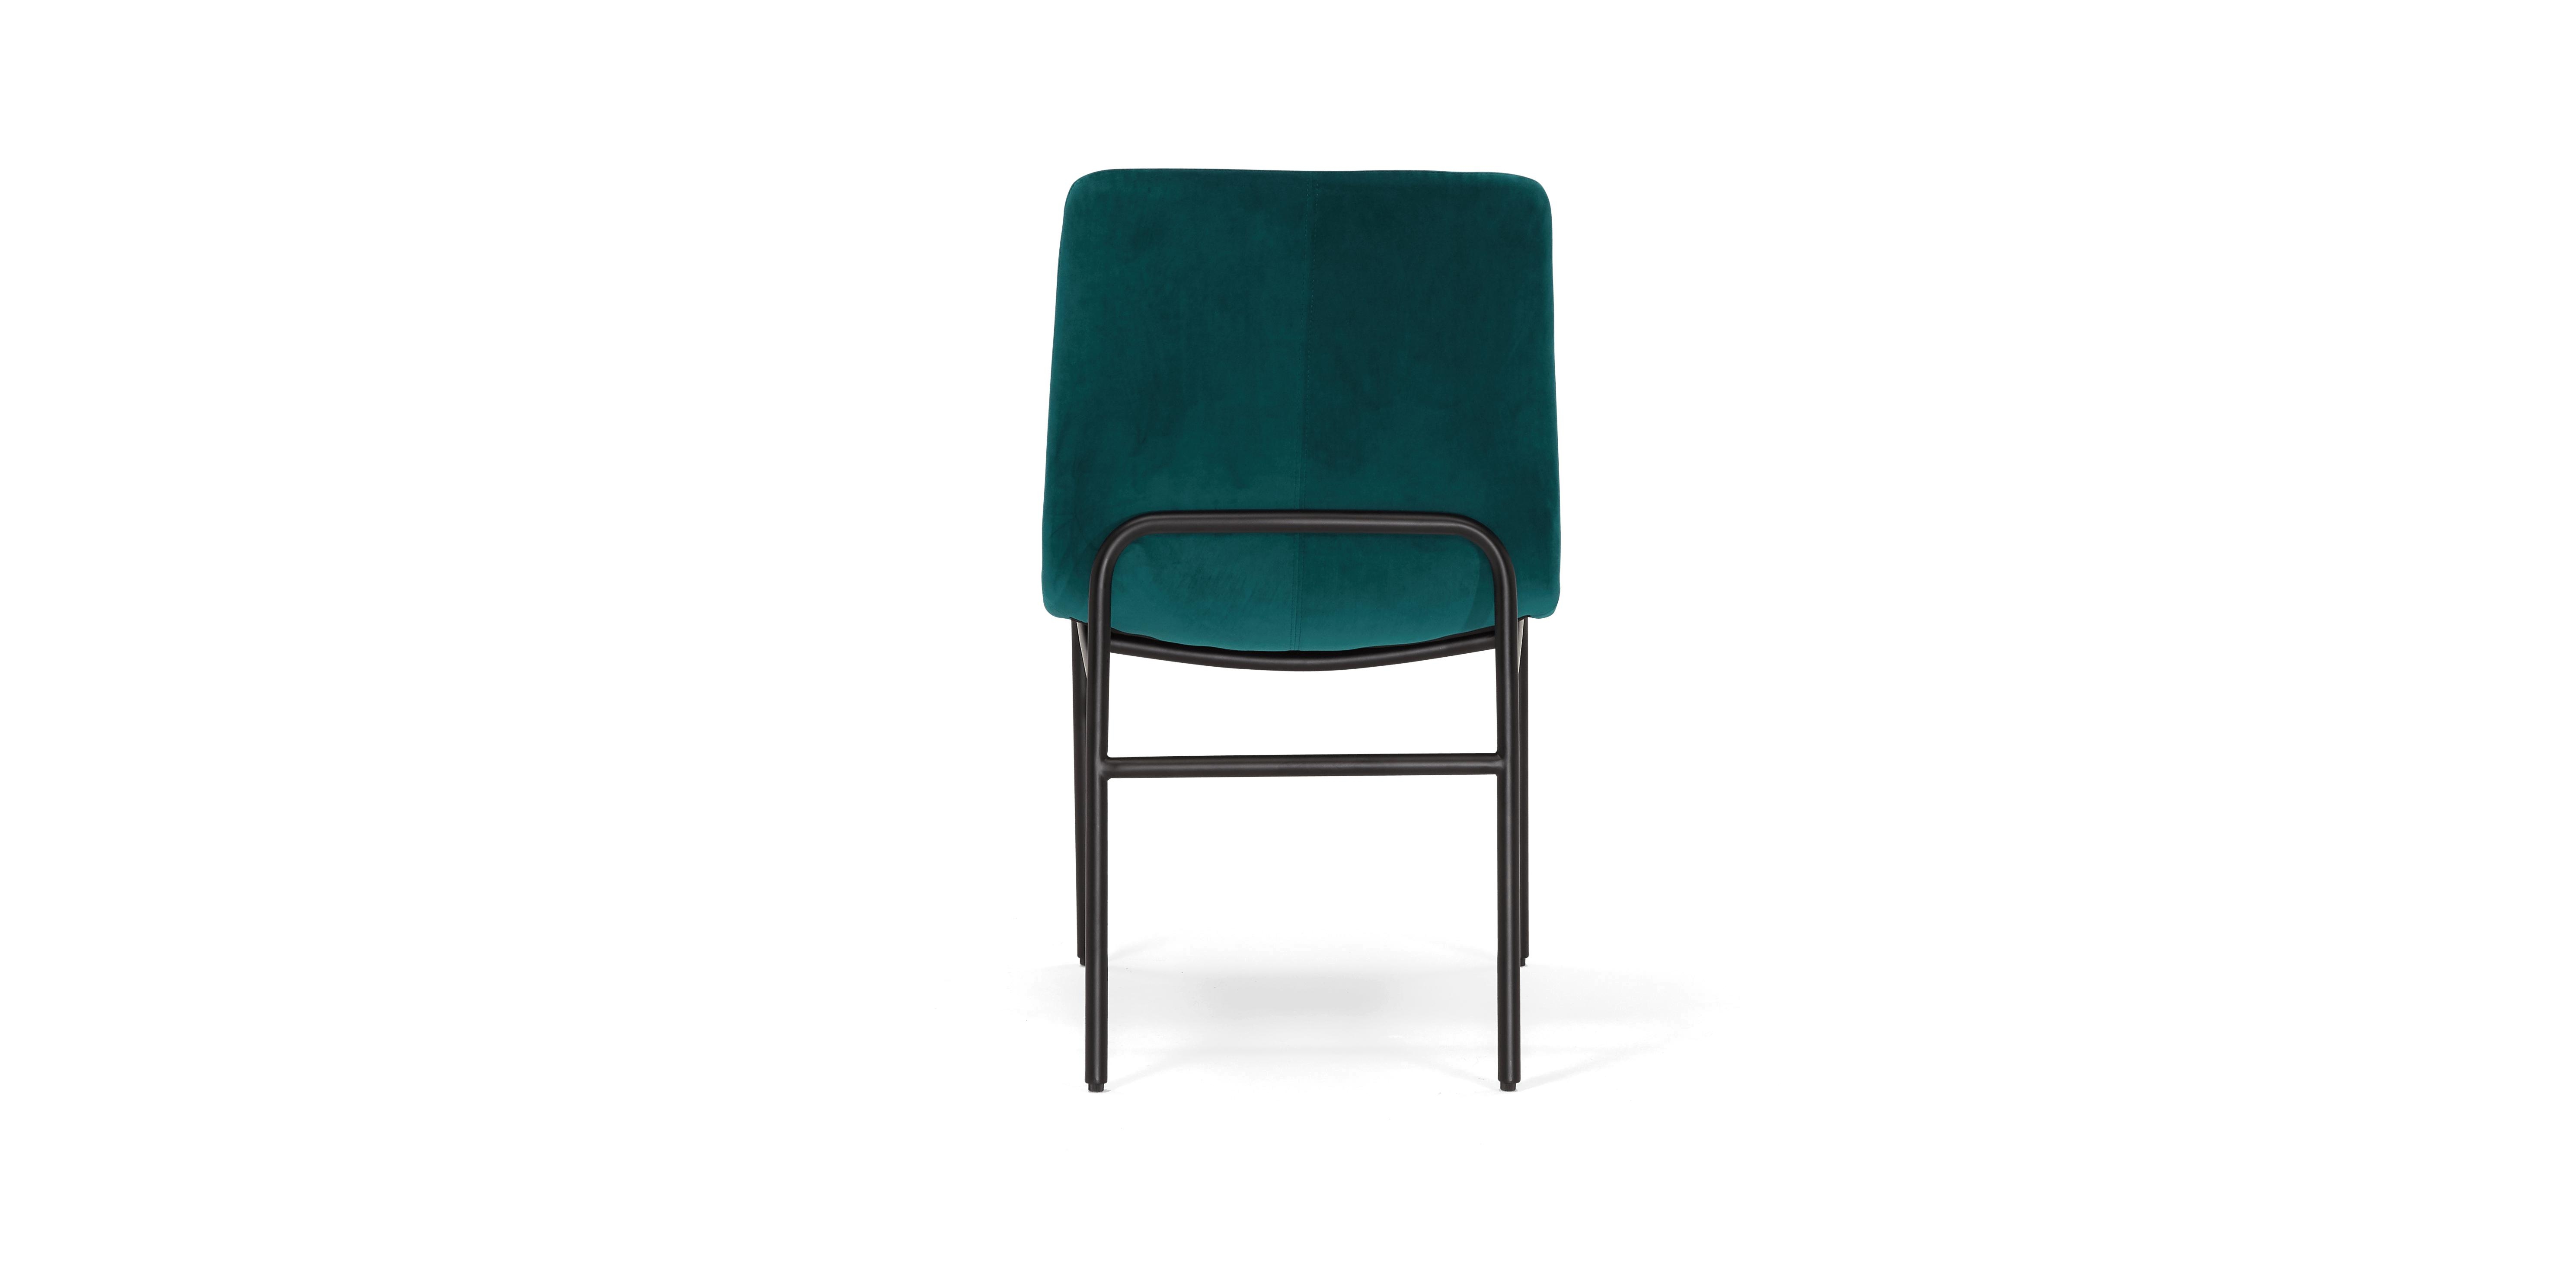 Blue Rae Mid Century Modern Dining Side Chair (Set of 2) - Royale Peacock - Image 4